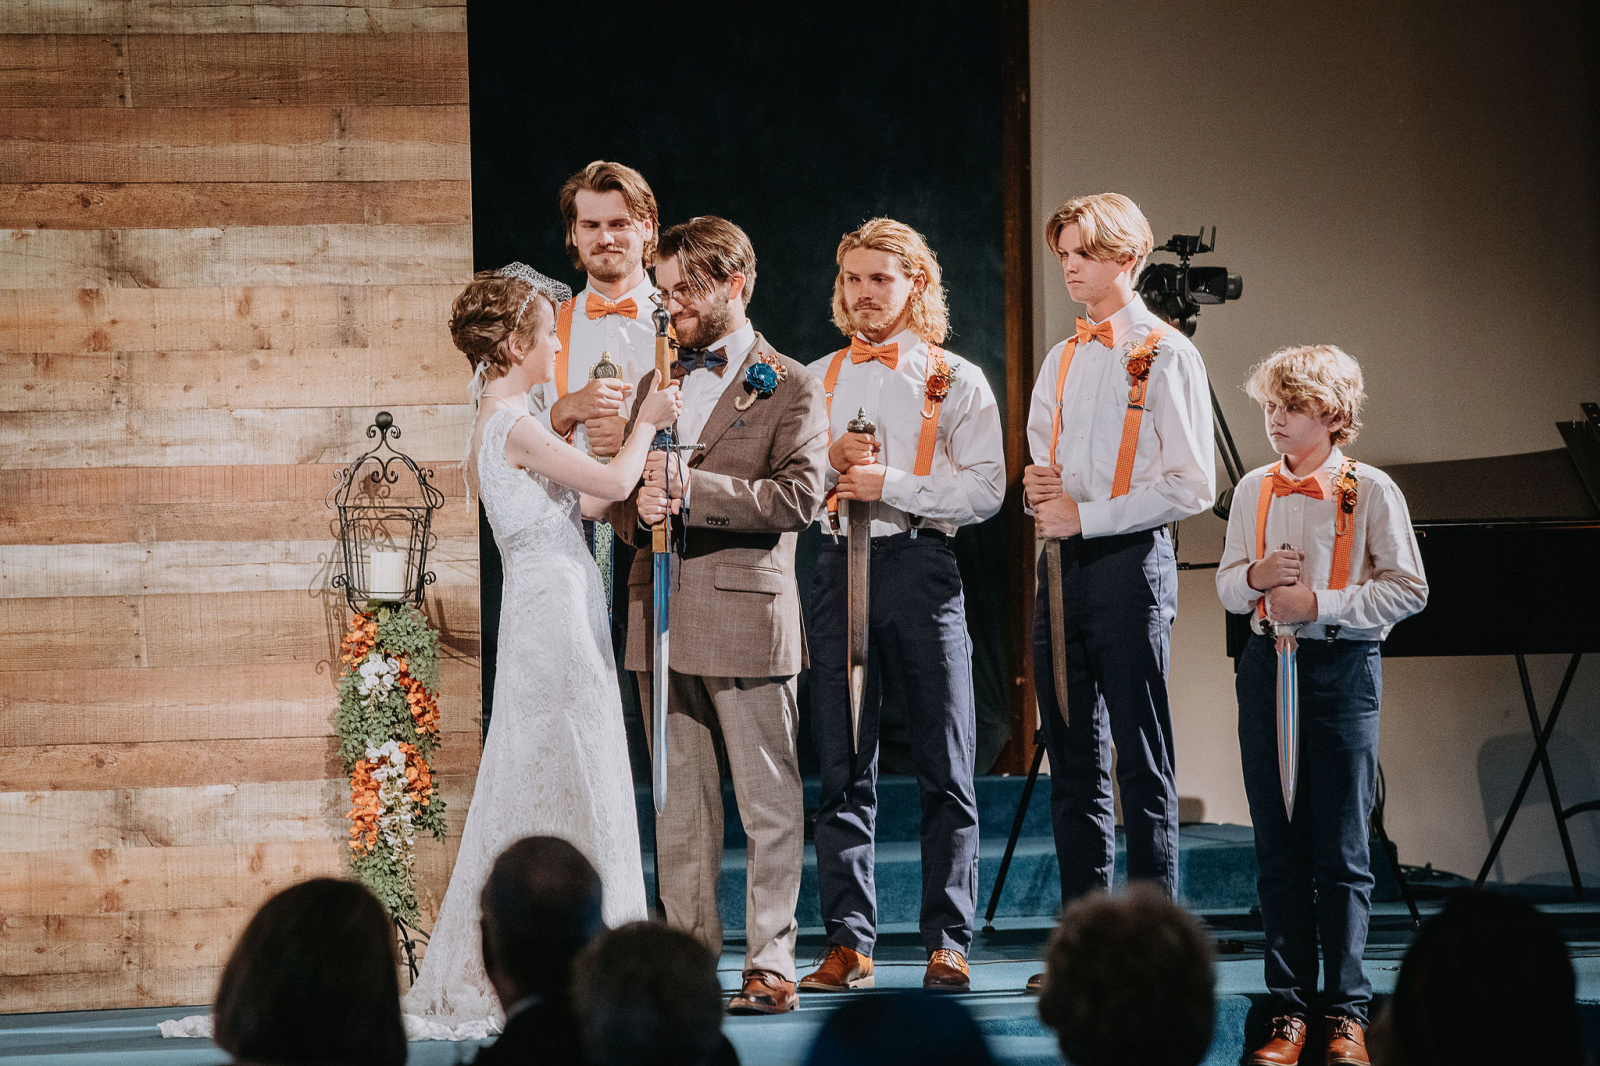 When the older Long sons turned 13, they were each presented with a sword by their parents. During the ceremony, Sarah and Gage wound her purity ring around his sword with a piece of leather.